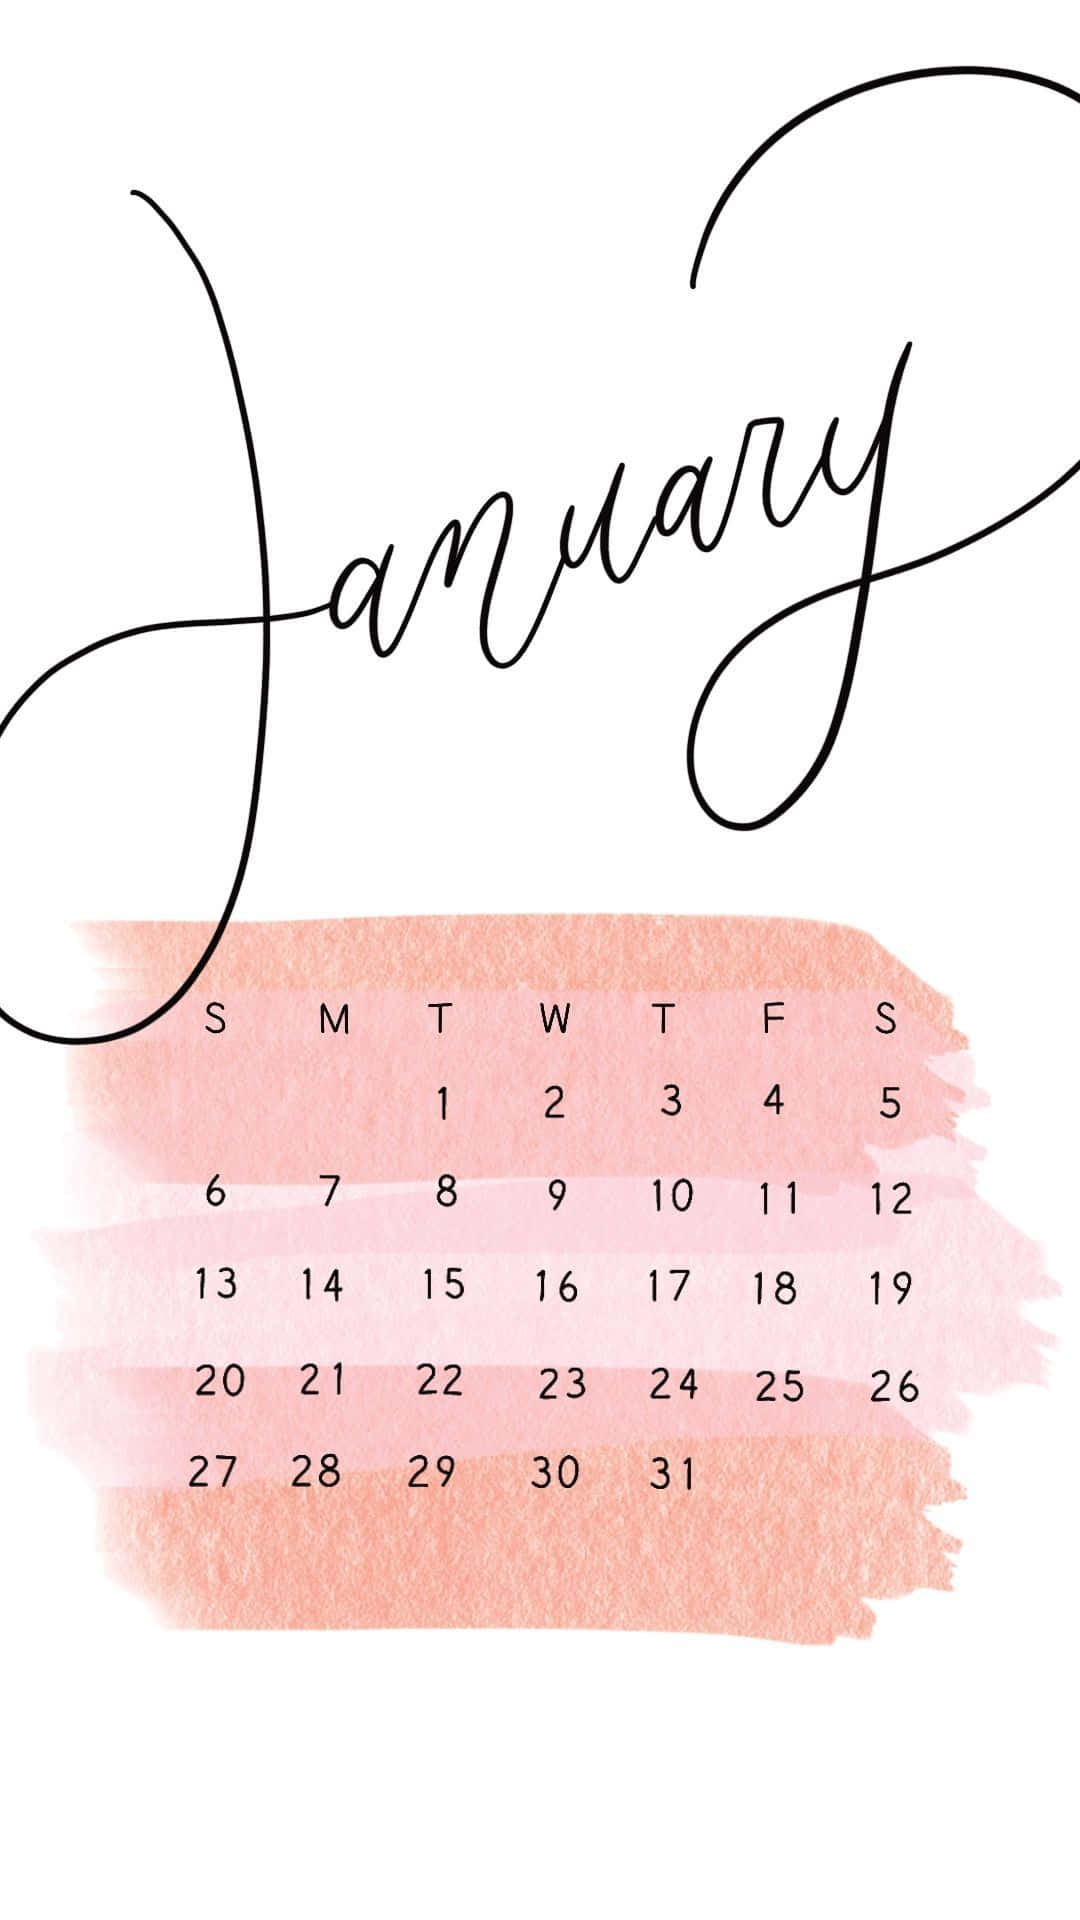 Get Ready for Cute January! Wallpaper